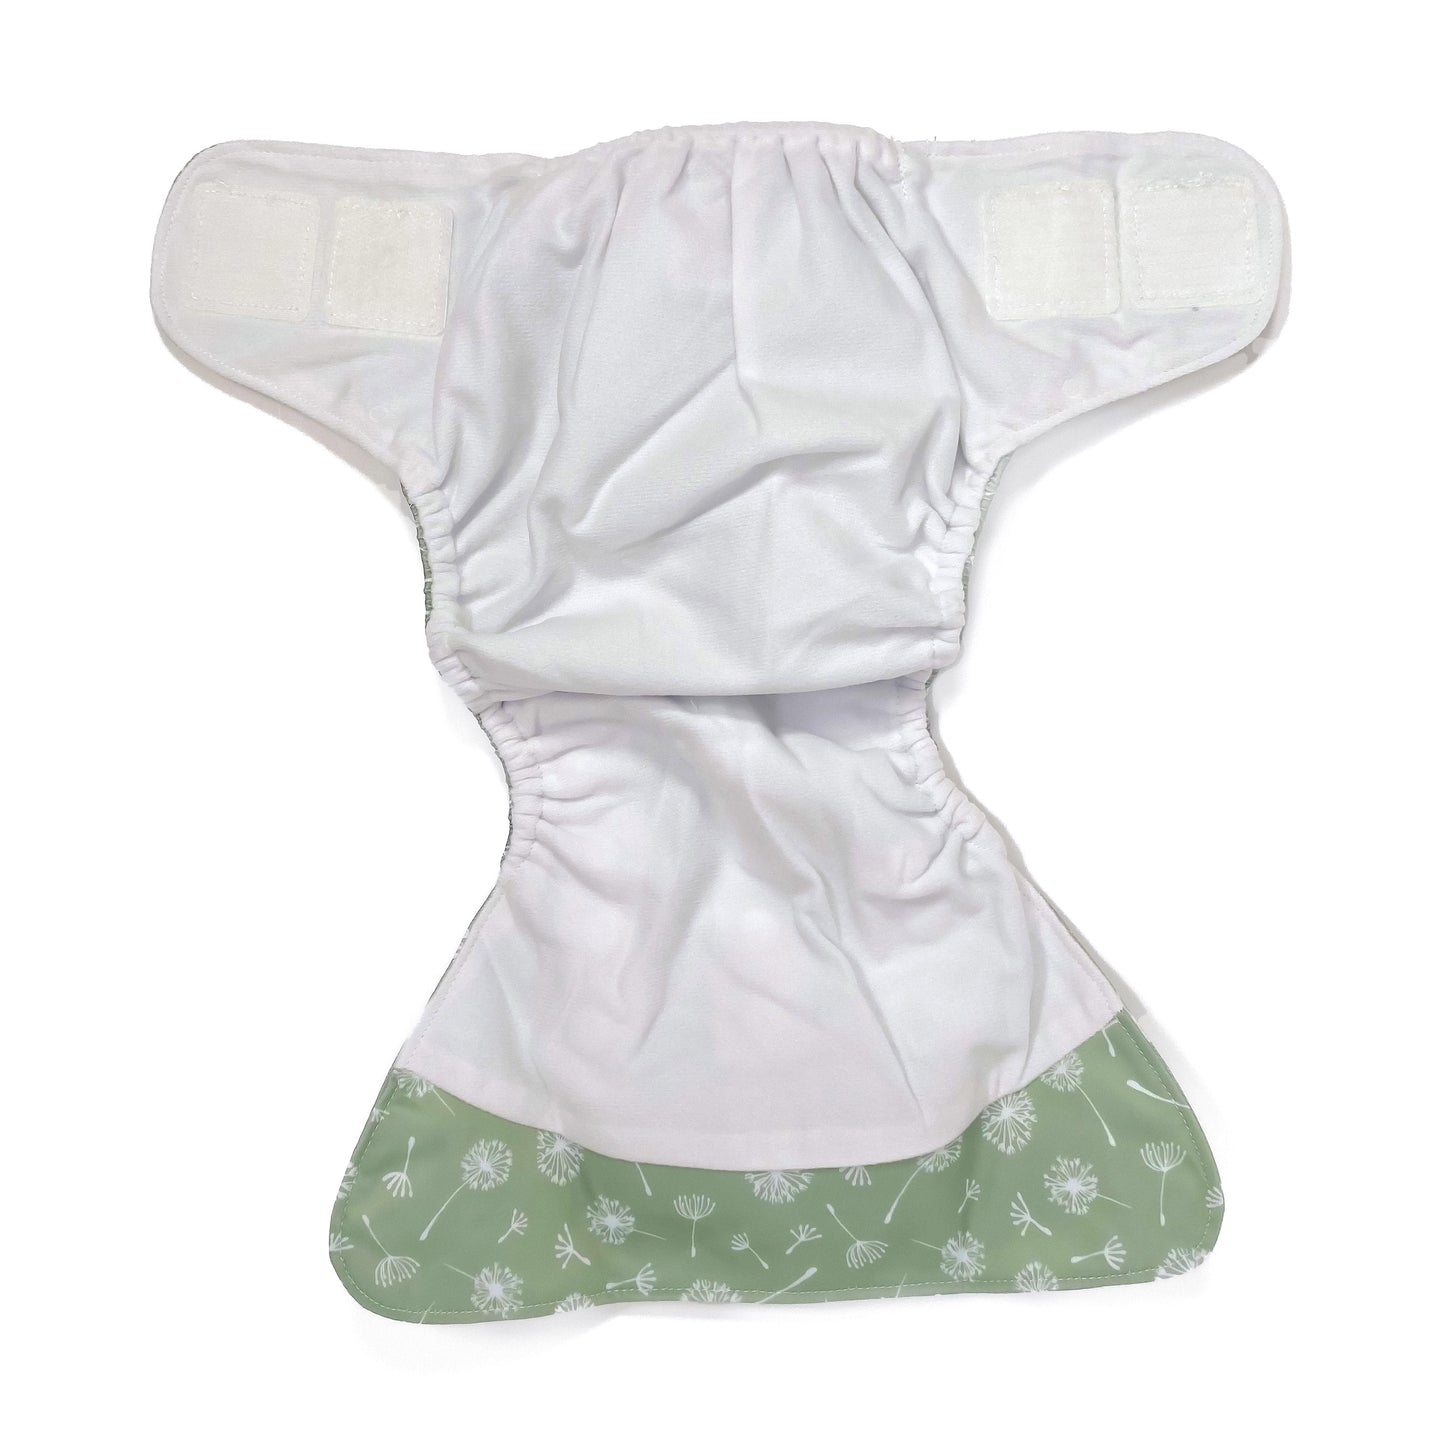 An adjustable reusable nappy for babies and toddlers, featuring a green dandelion design, with images of dandelion seeds on a green background. View shows the inside fabric of the nappy.